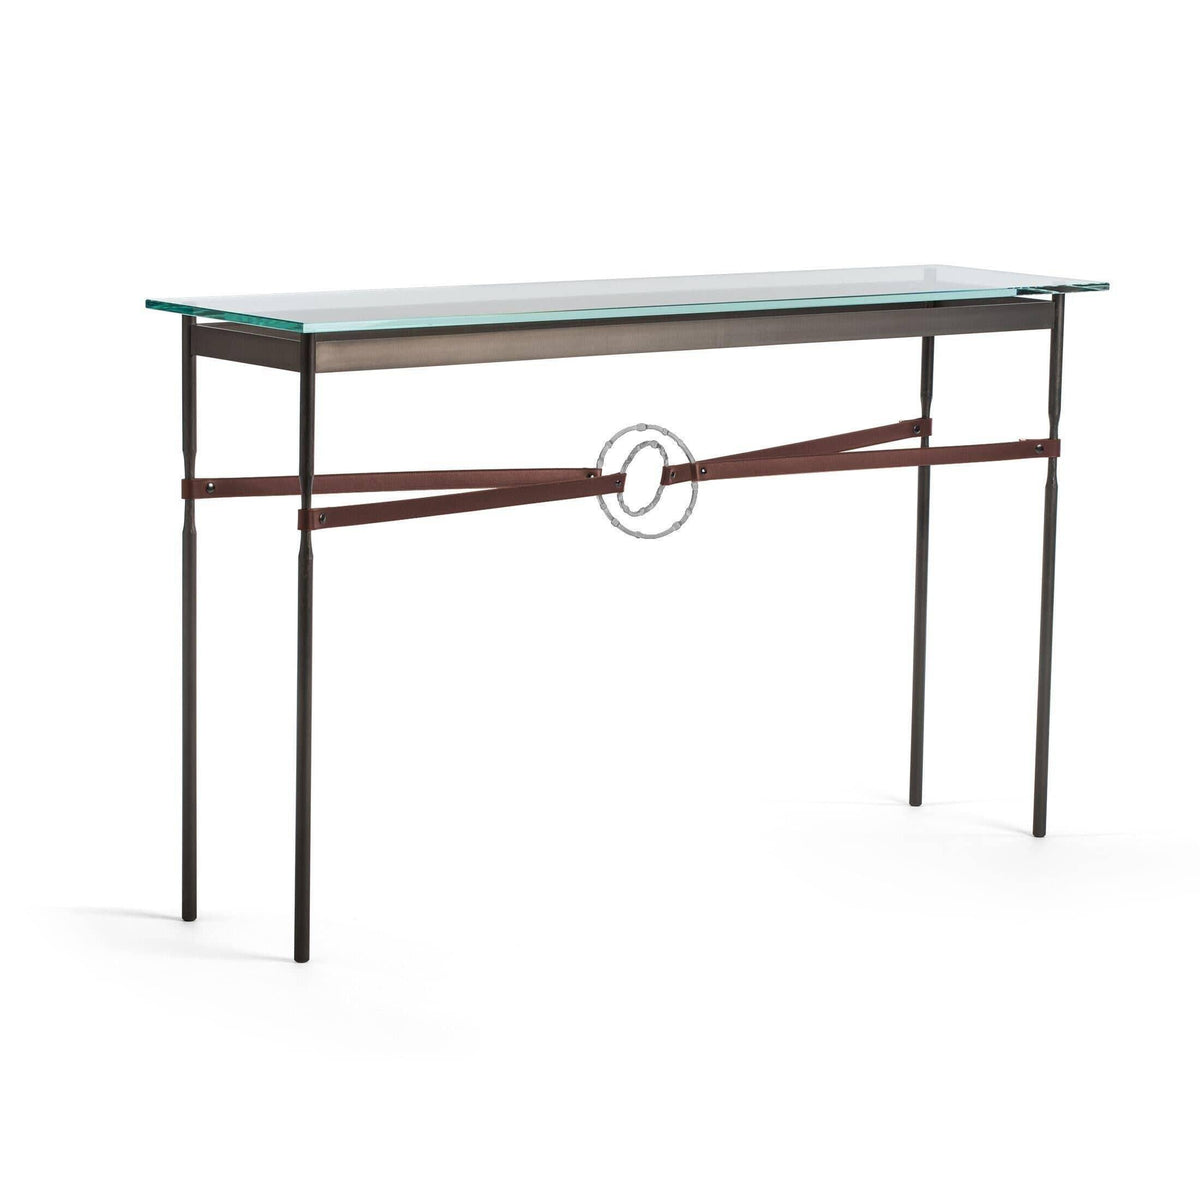 Hubbardton Forge - Equus Brown Leather Console Table - 750118-07-82-LB-VA0714 | Montreal Lighting & Hardware